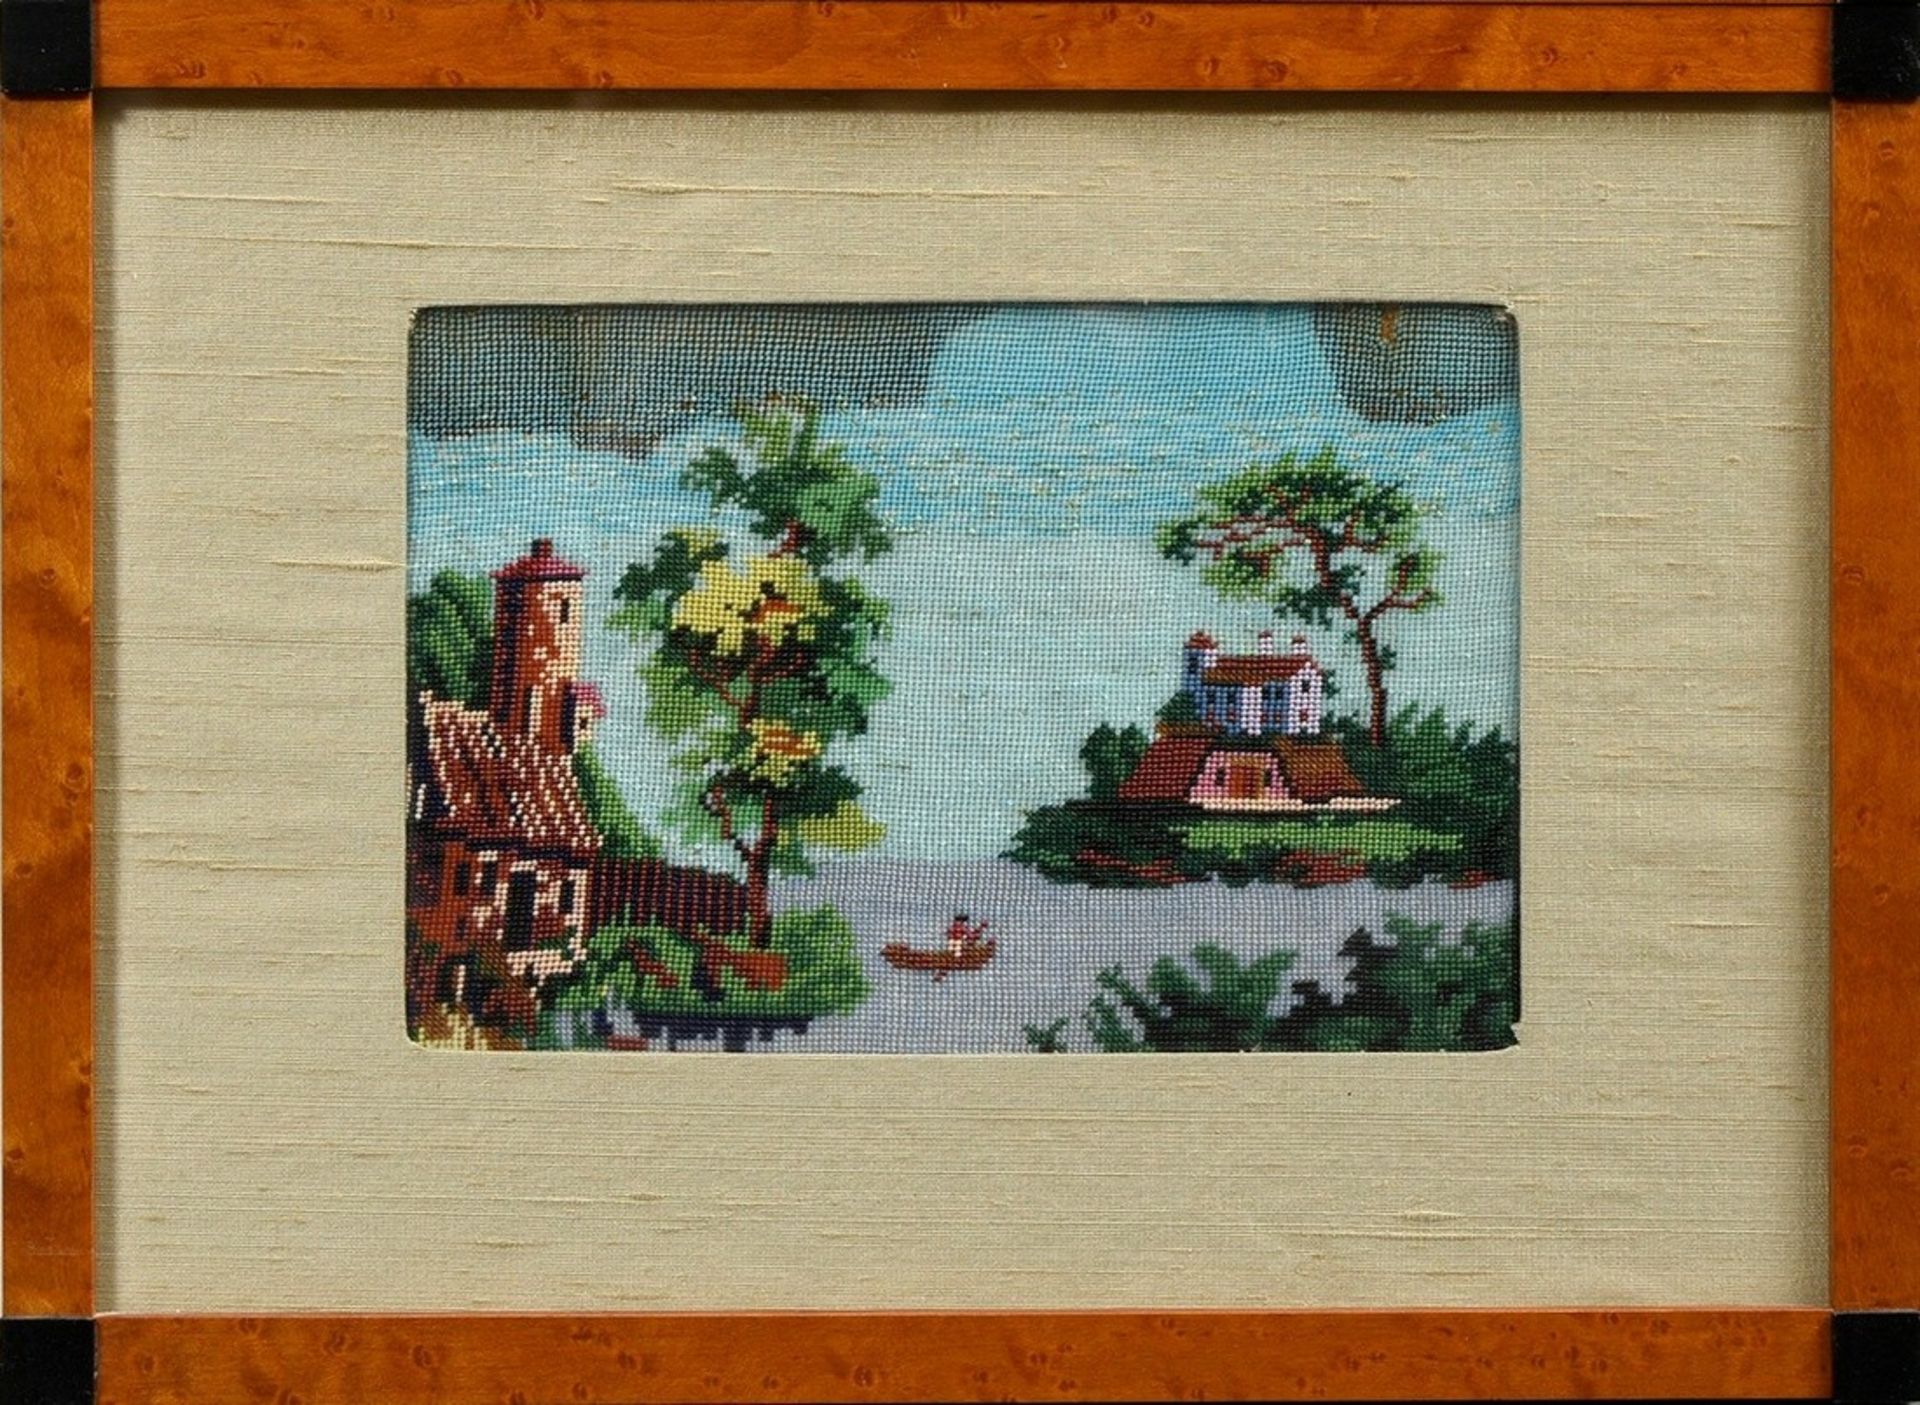 2 Fine pearl embroidery pictures "Hunting dog pack under tree" and "Seascape with buildings", proba - Image 2 of 5